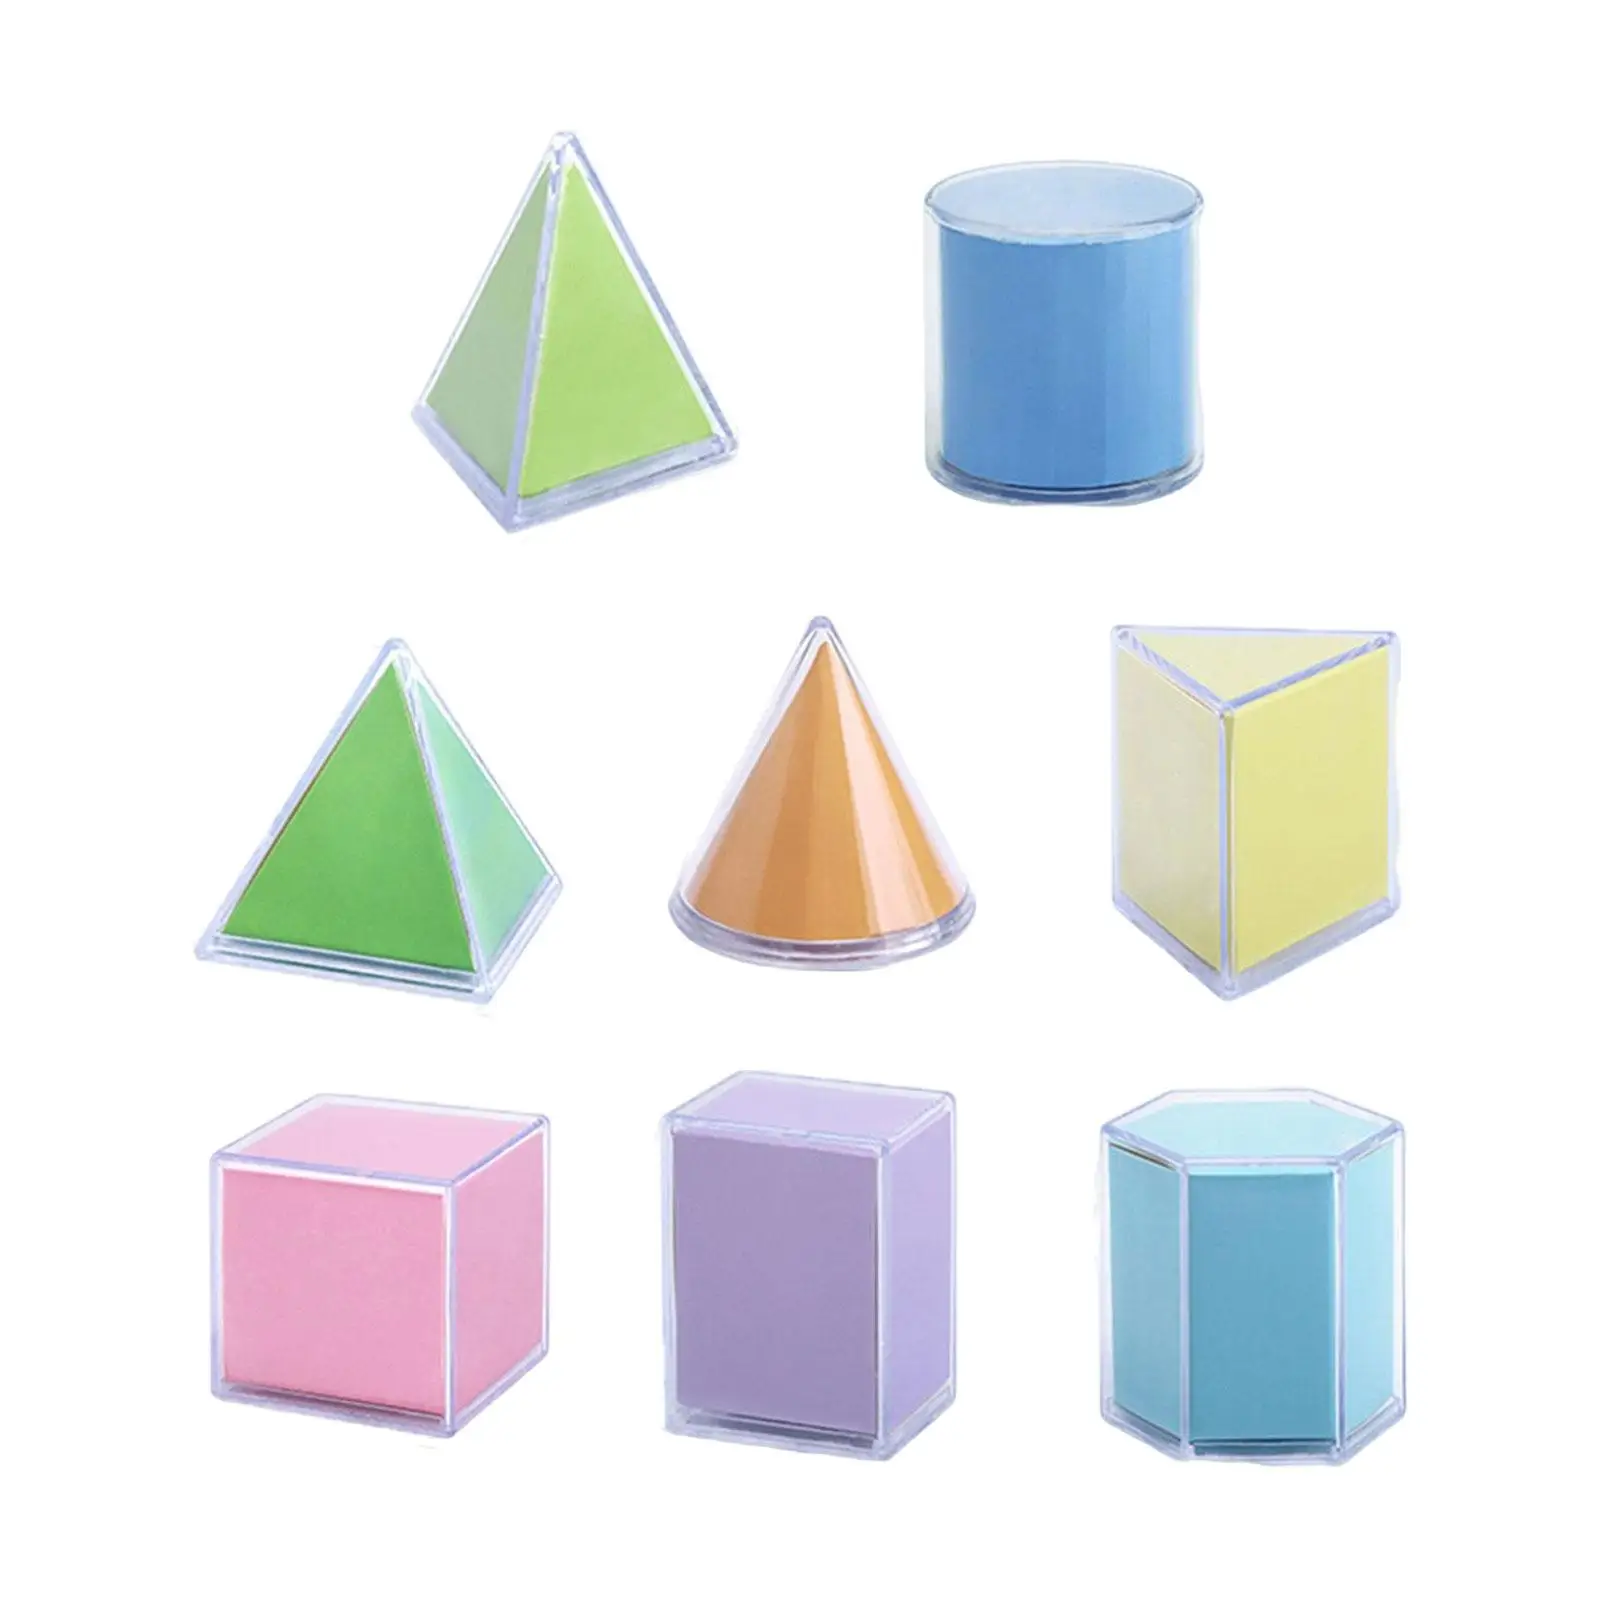 8 Pieces Transparent Geometric Shapes Blocks Stacking Montessori Toys for Kids Babies